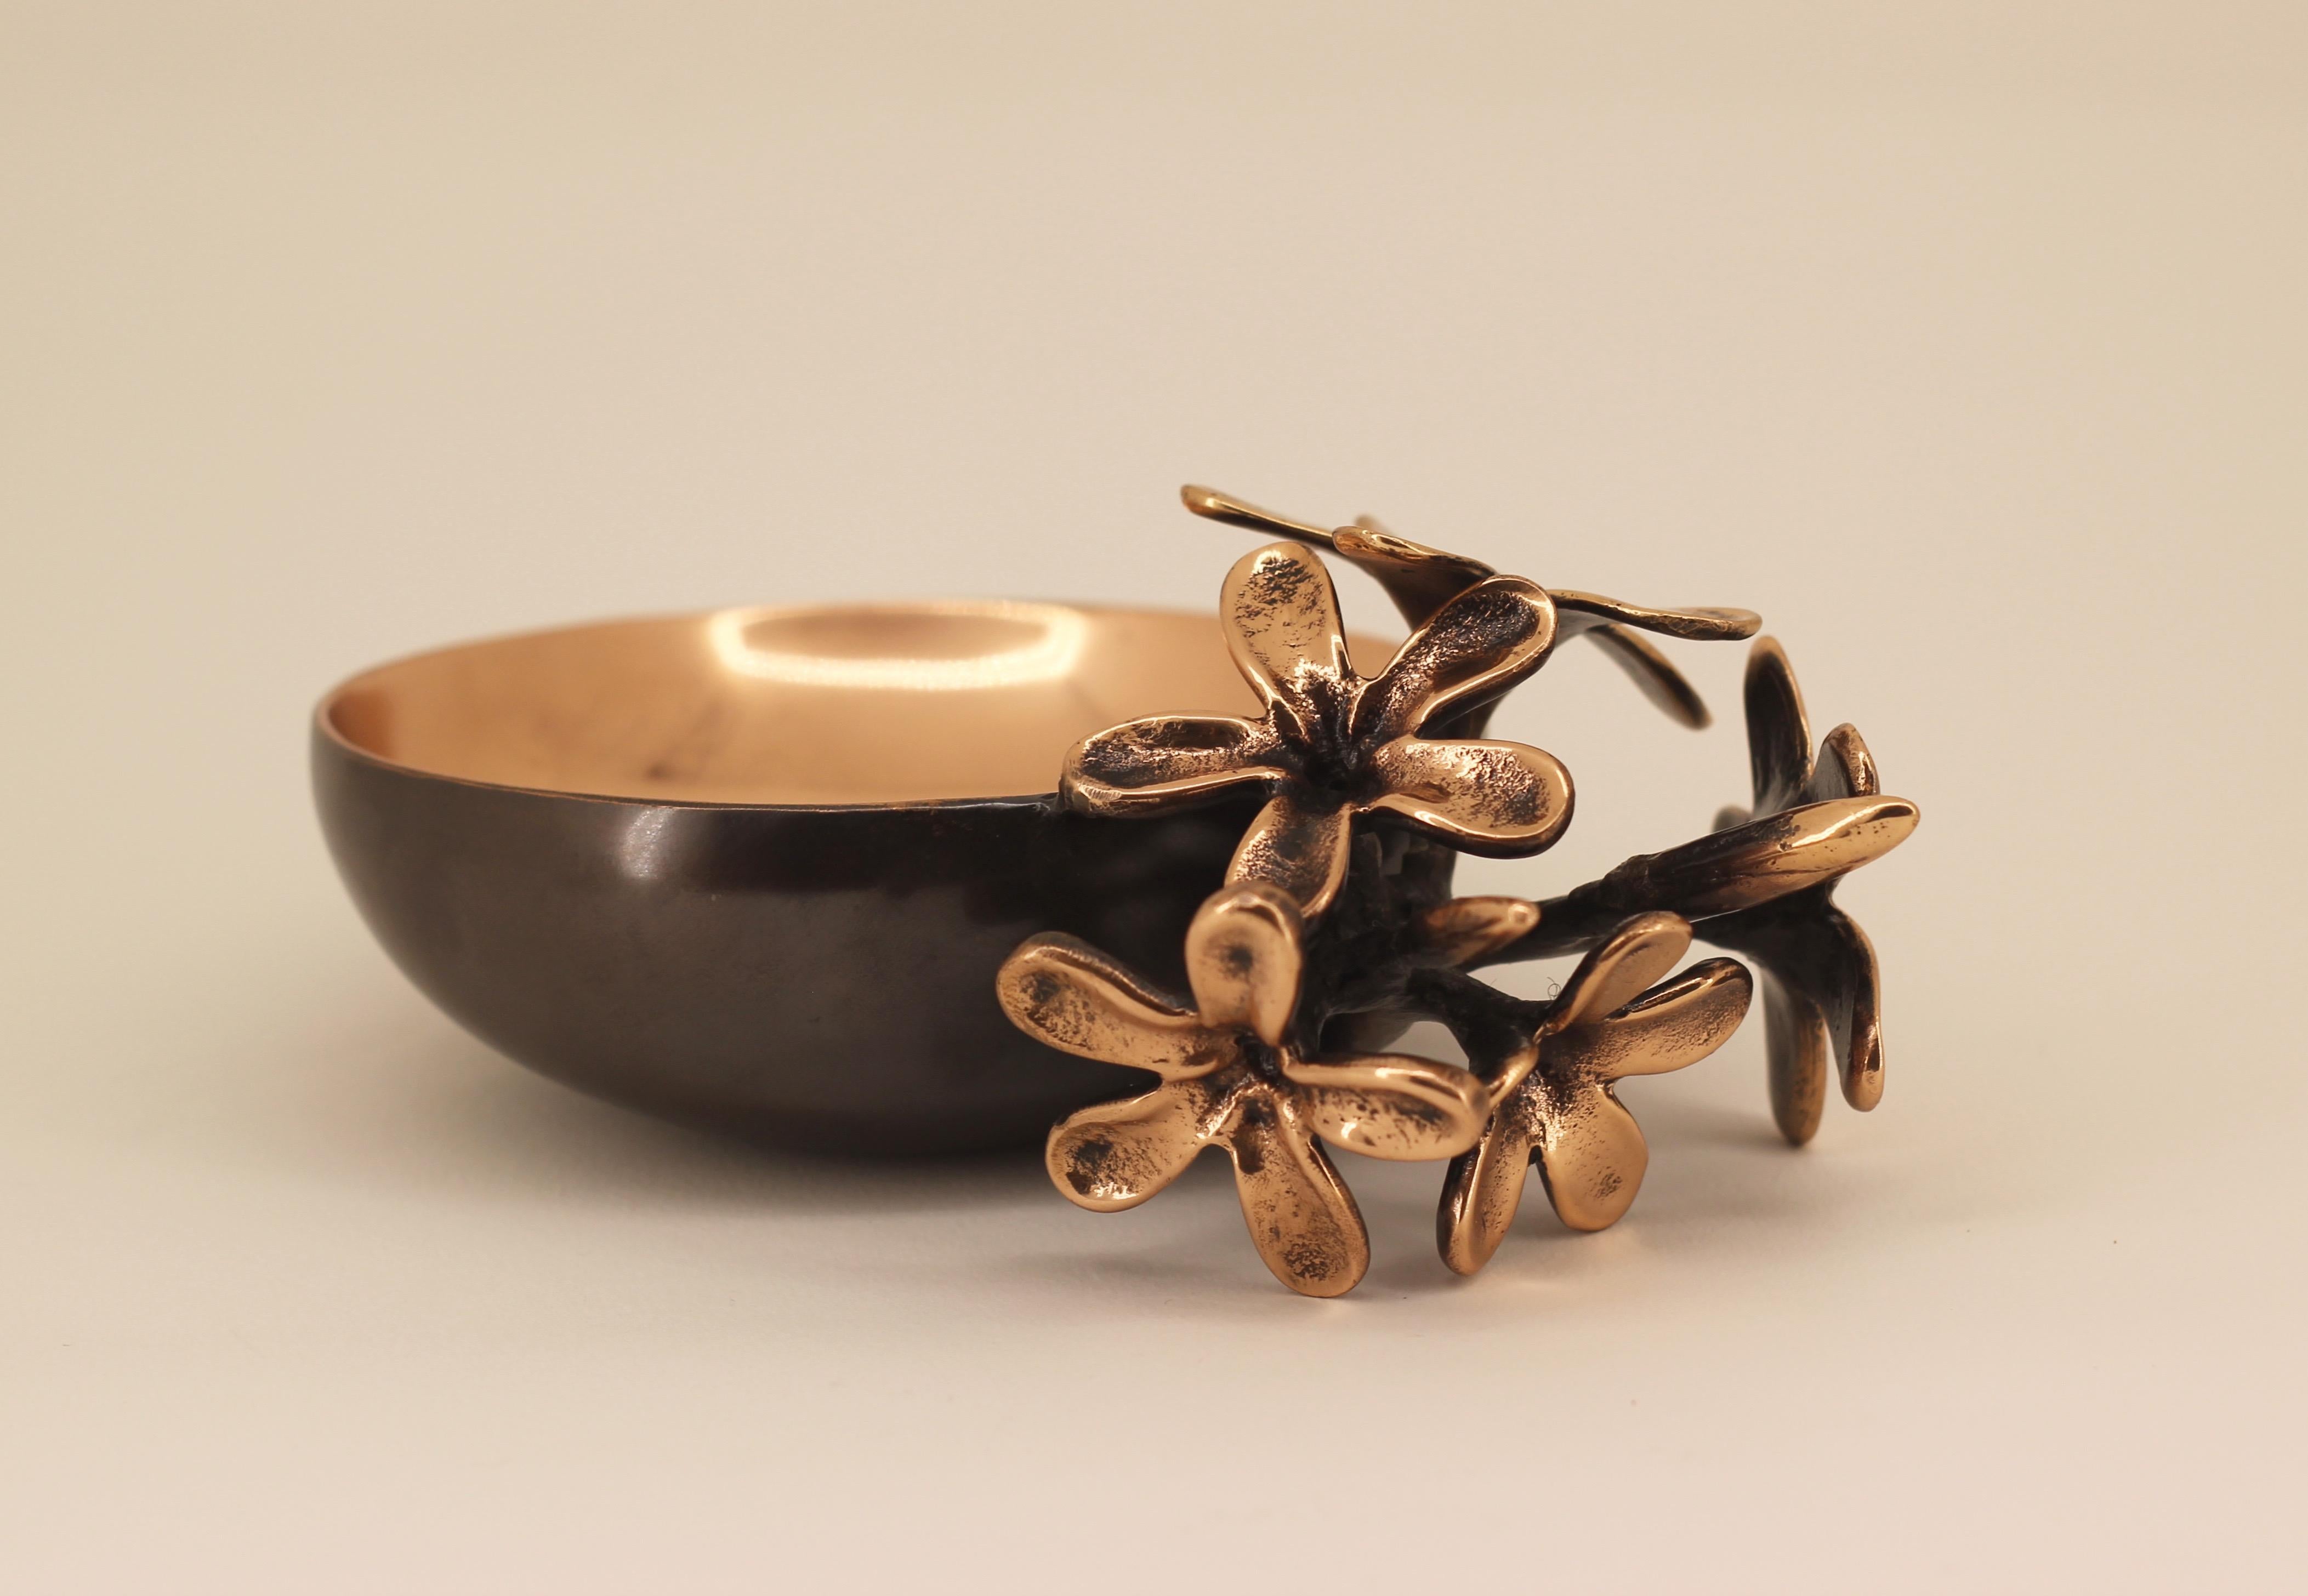 Indian Handmade Cast Bronze Bowl with Flowers, Vide-Poche